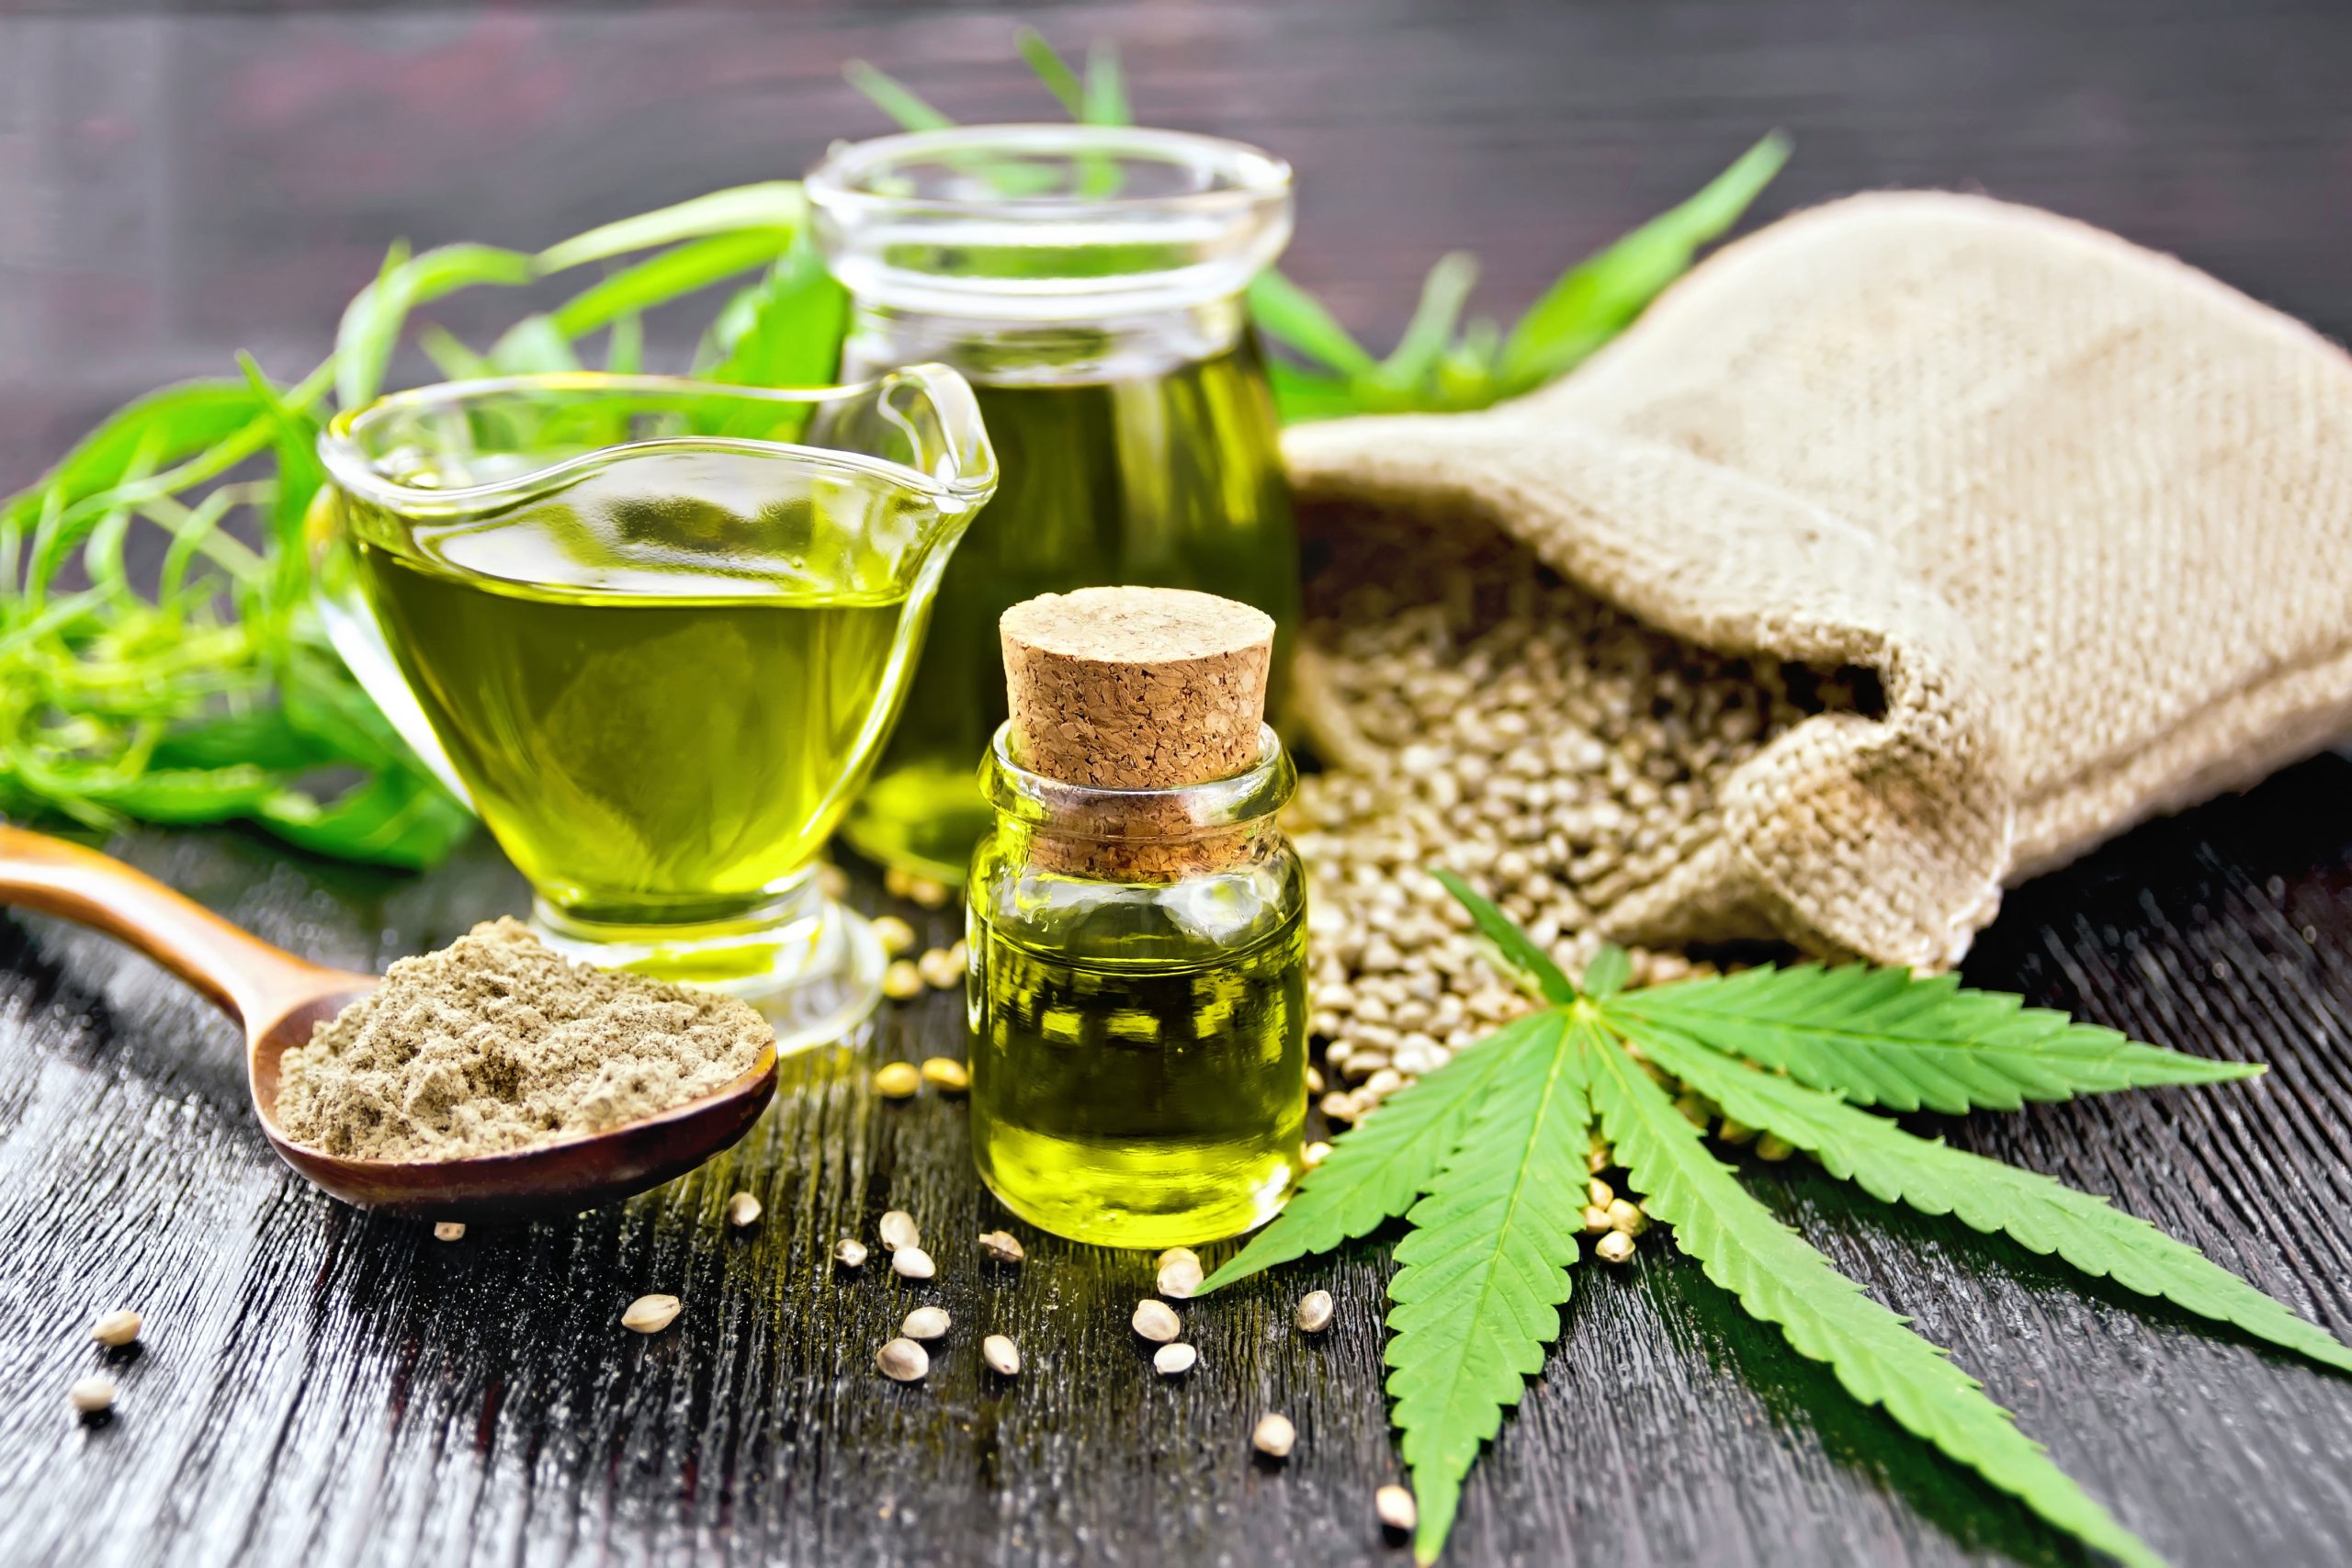 Therapeutic Effects of Cannabis and Cannabinoids